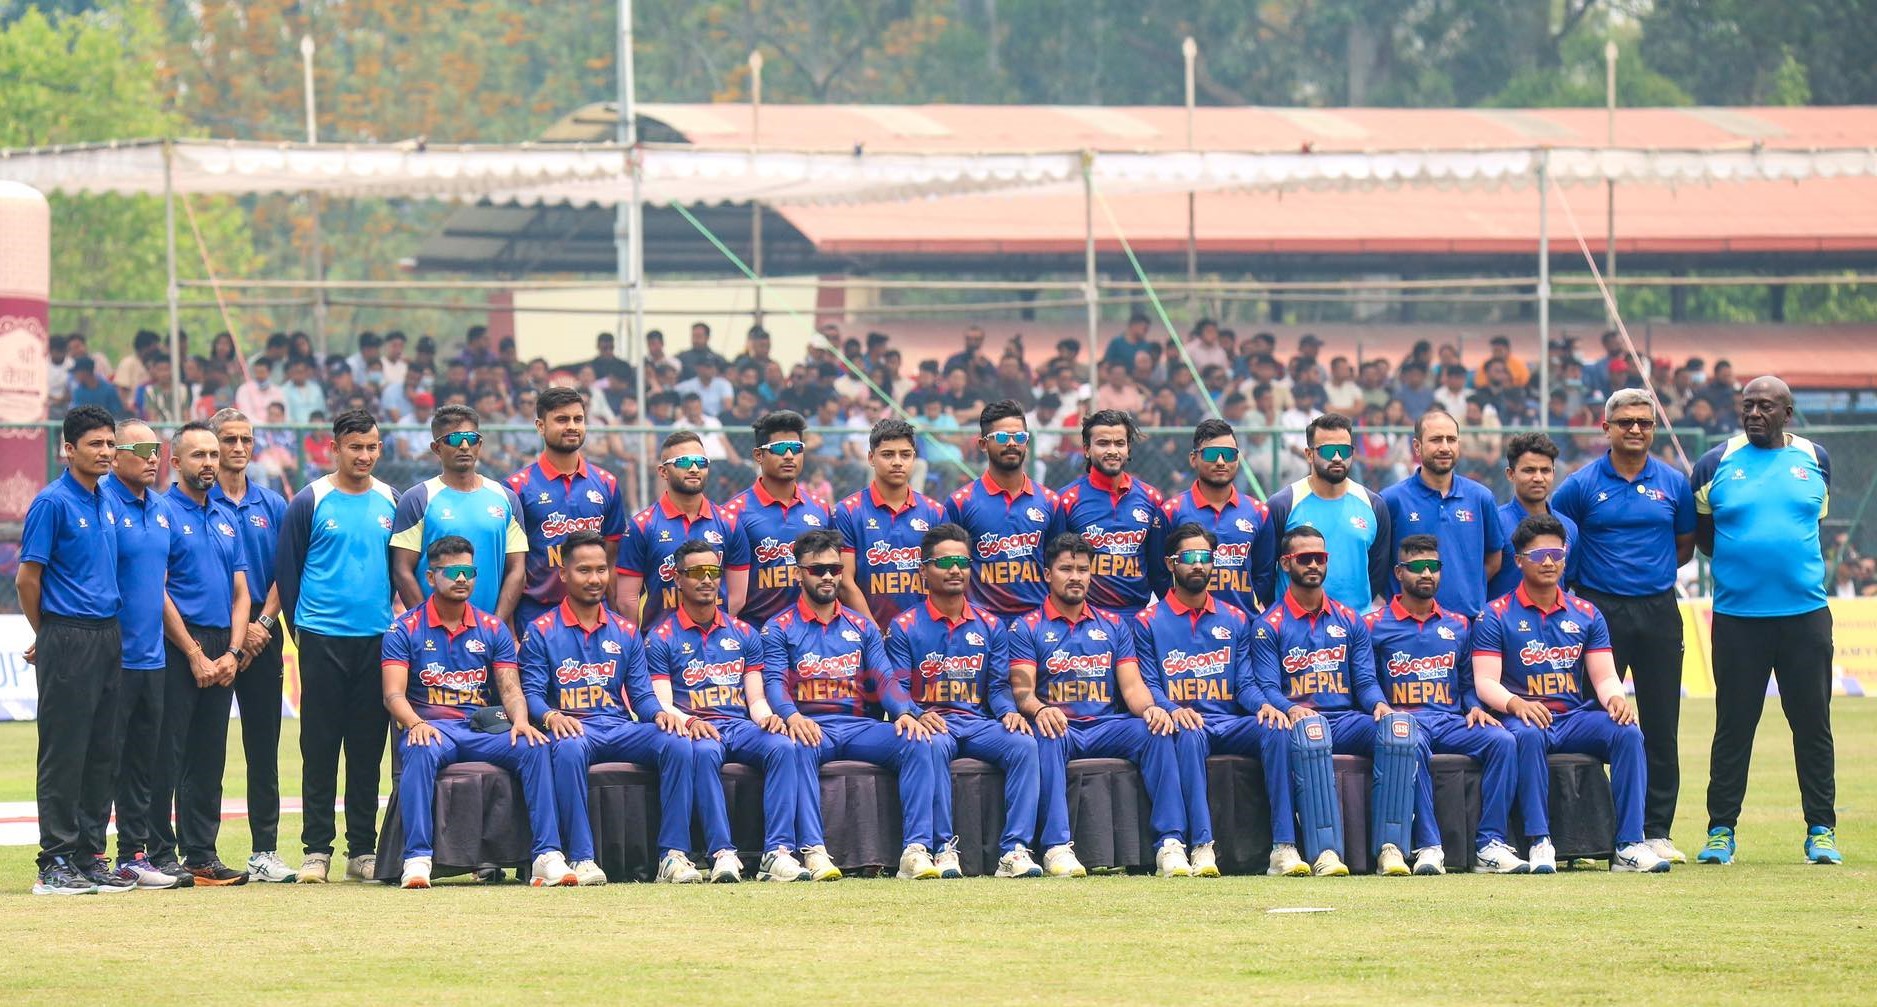 Such is the schedule of Nepali team to play World Cup